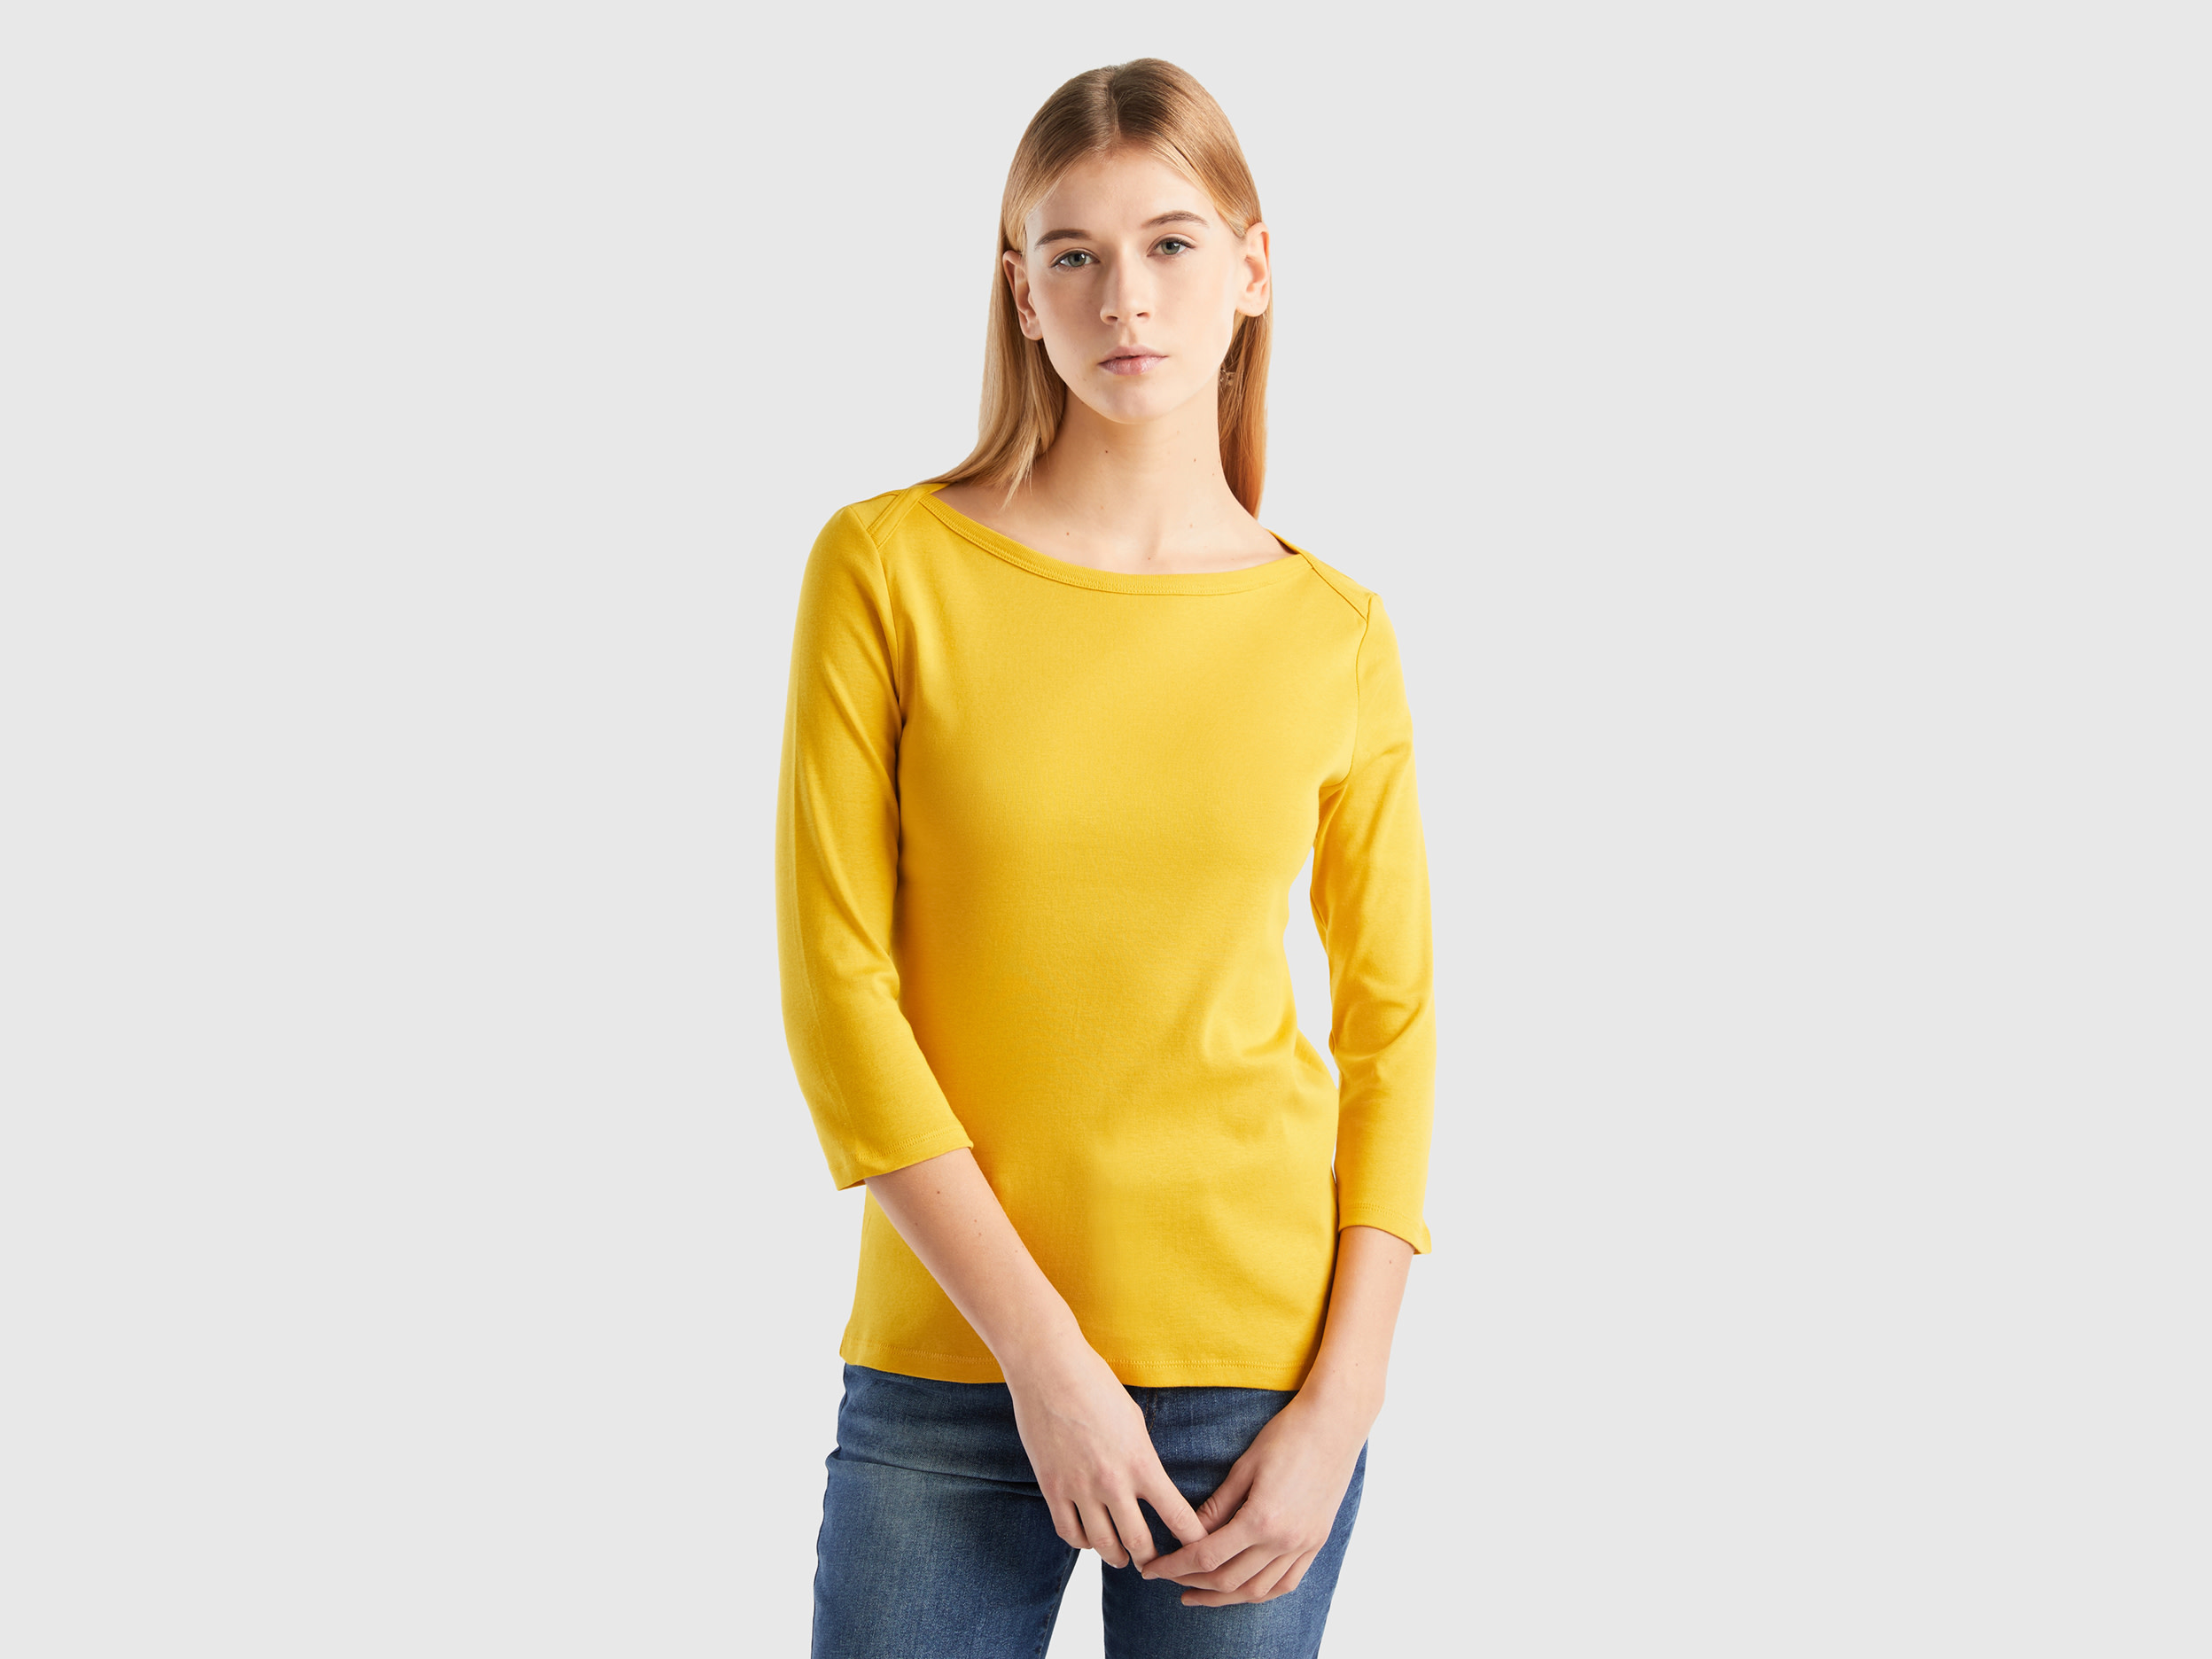 Benetton, T-shirt With Boat Neck In 100% Cotton, size XS, Yellow, Women